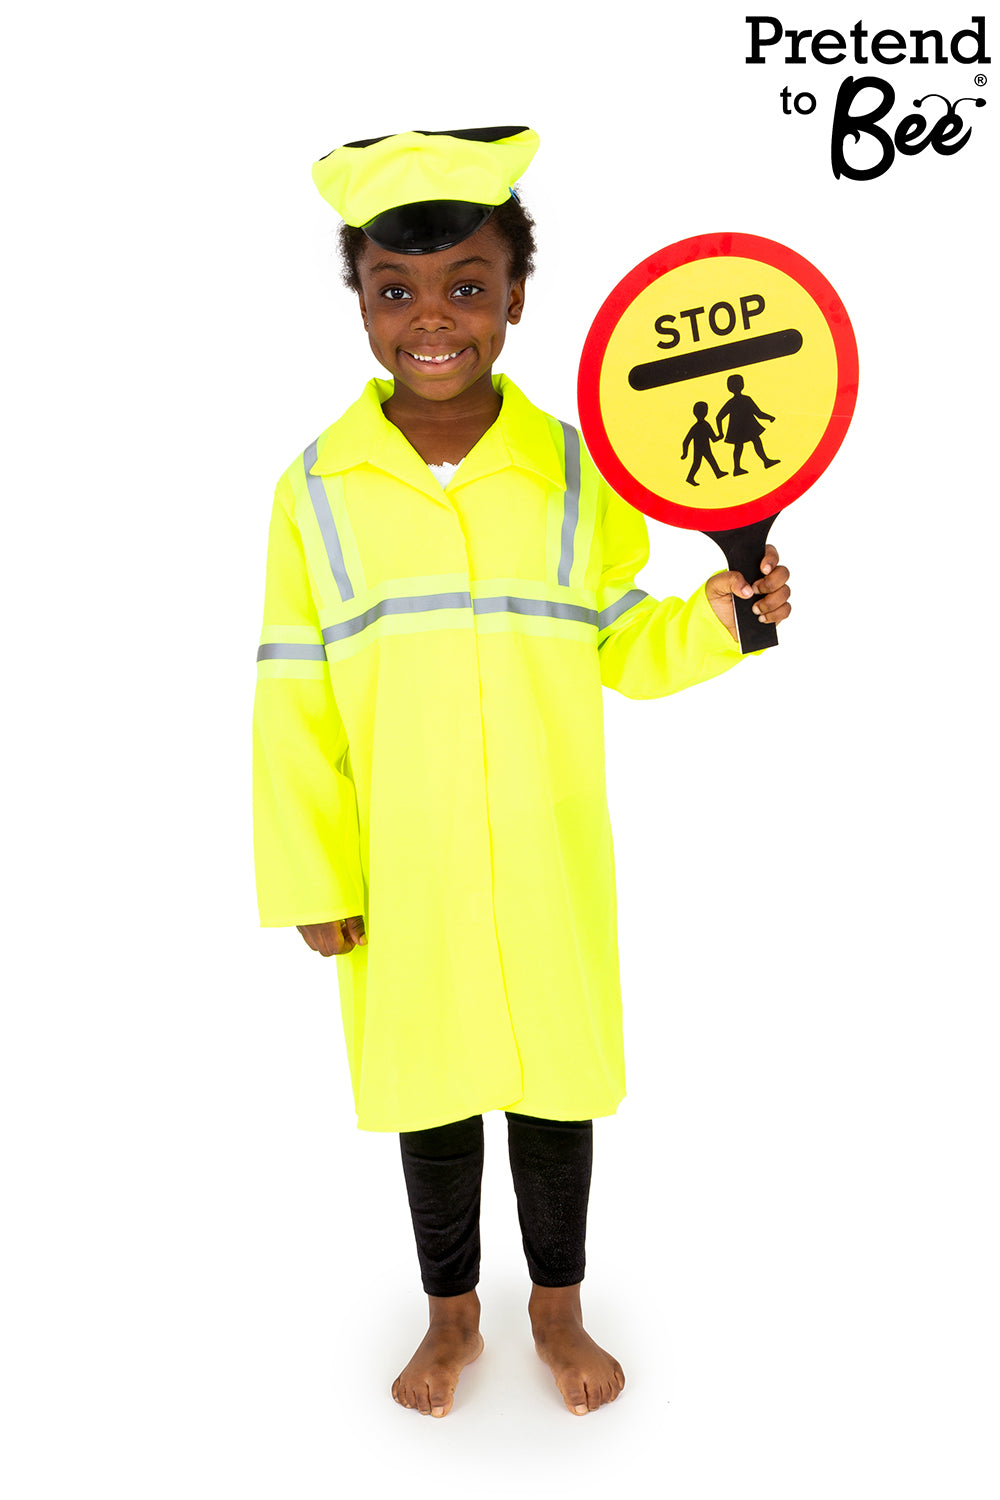 Child's Crossing Patrol outfit with reflective stripes. Long jacket, hat and "stop" sign